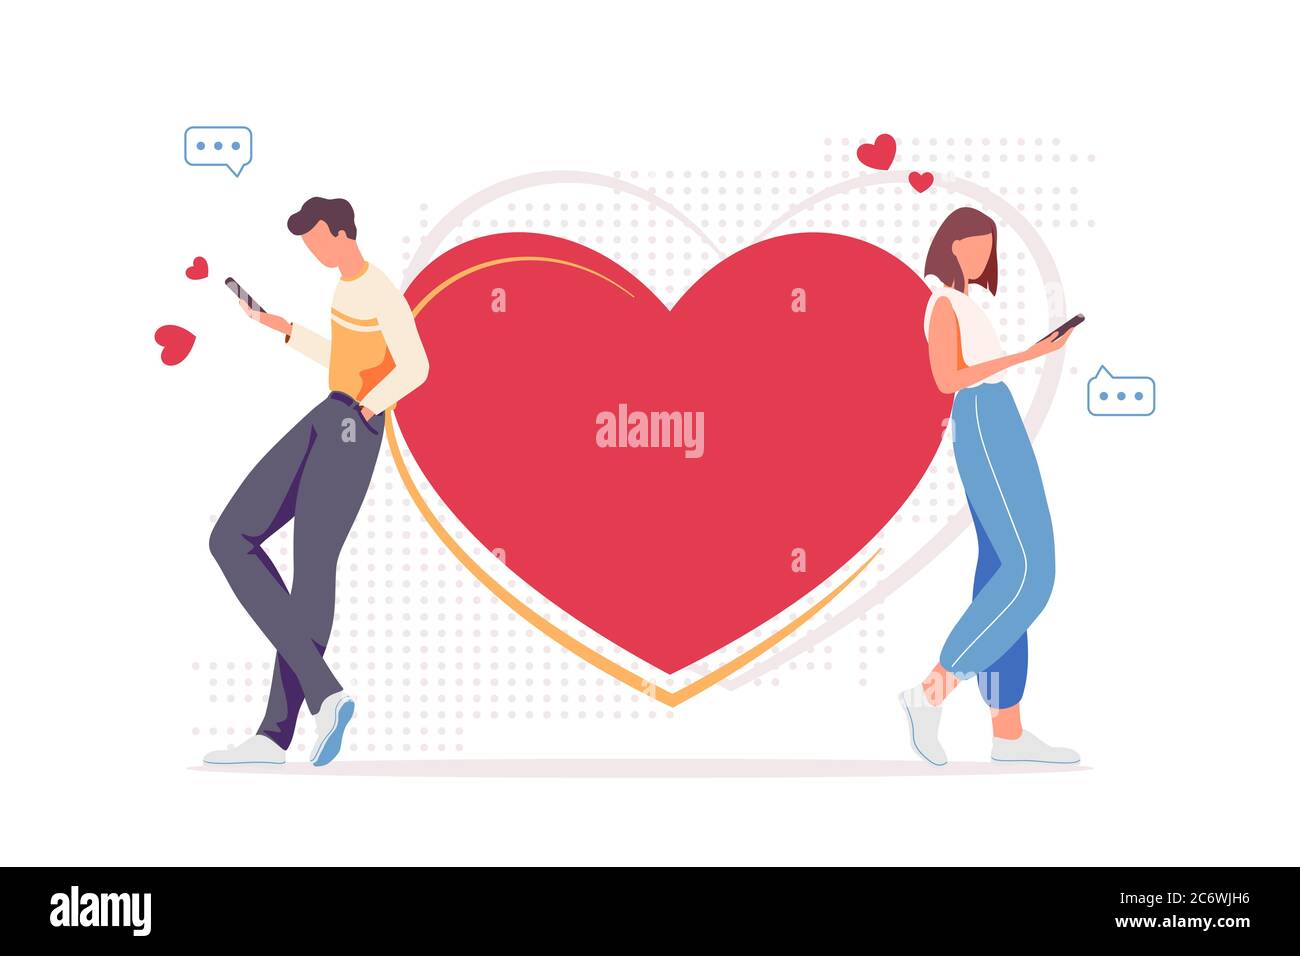 Cartoon illustration with online relationships. Technology, dating app and social media addiction. Internet love communication with smartphones. Web Chatting, write messages about date vector concept. Stock Vector